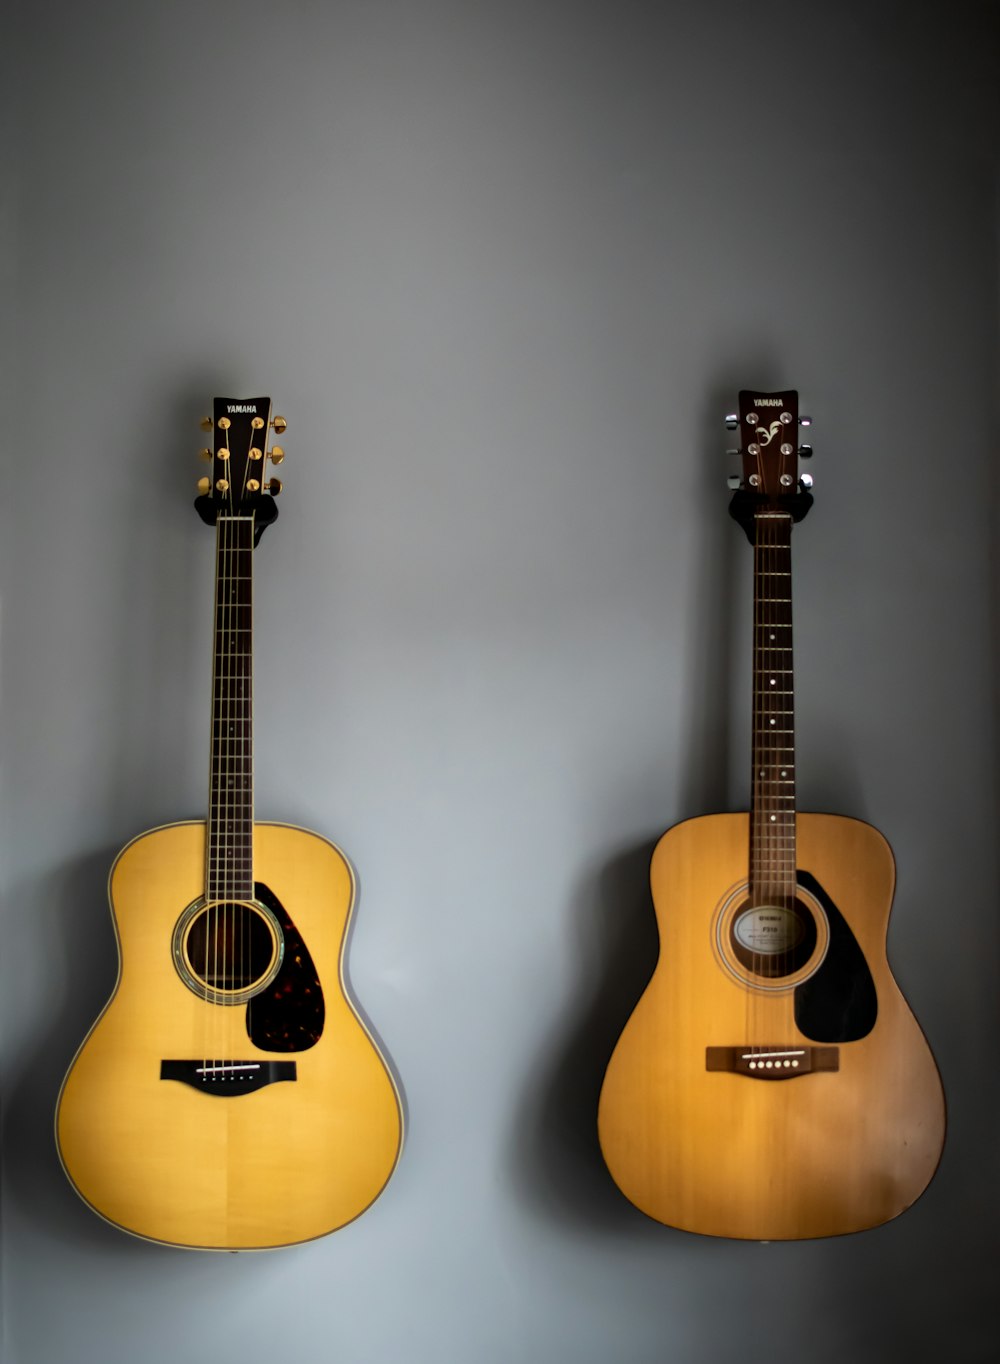 brown acoustic guitar on white wall